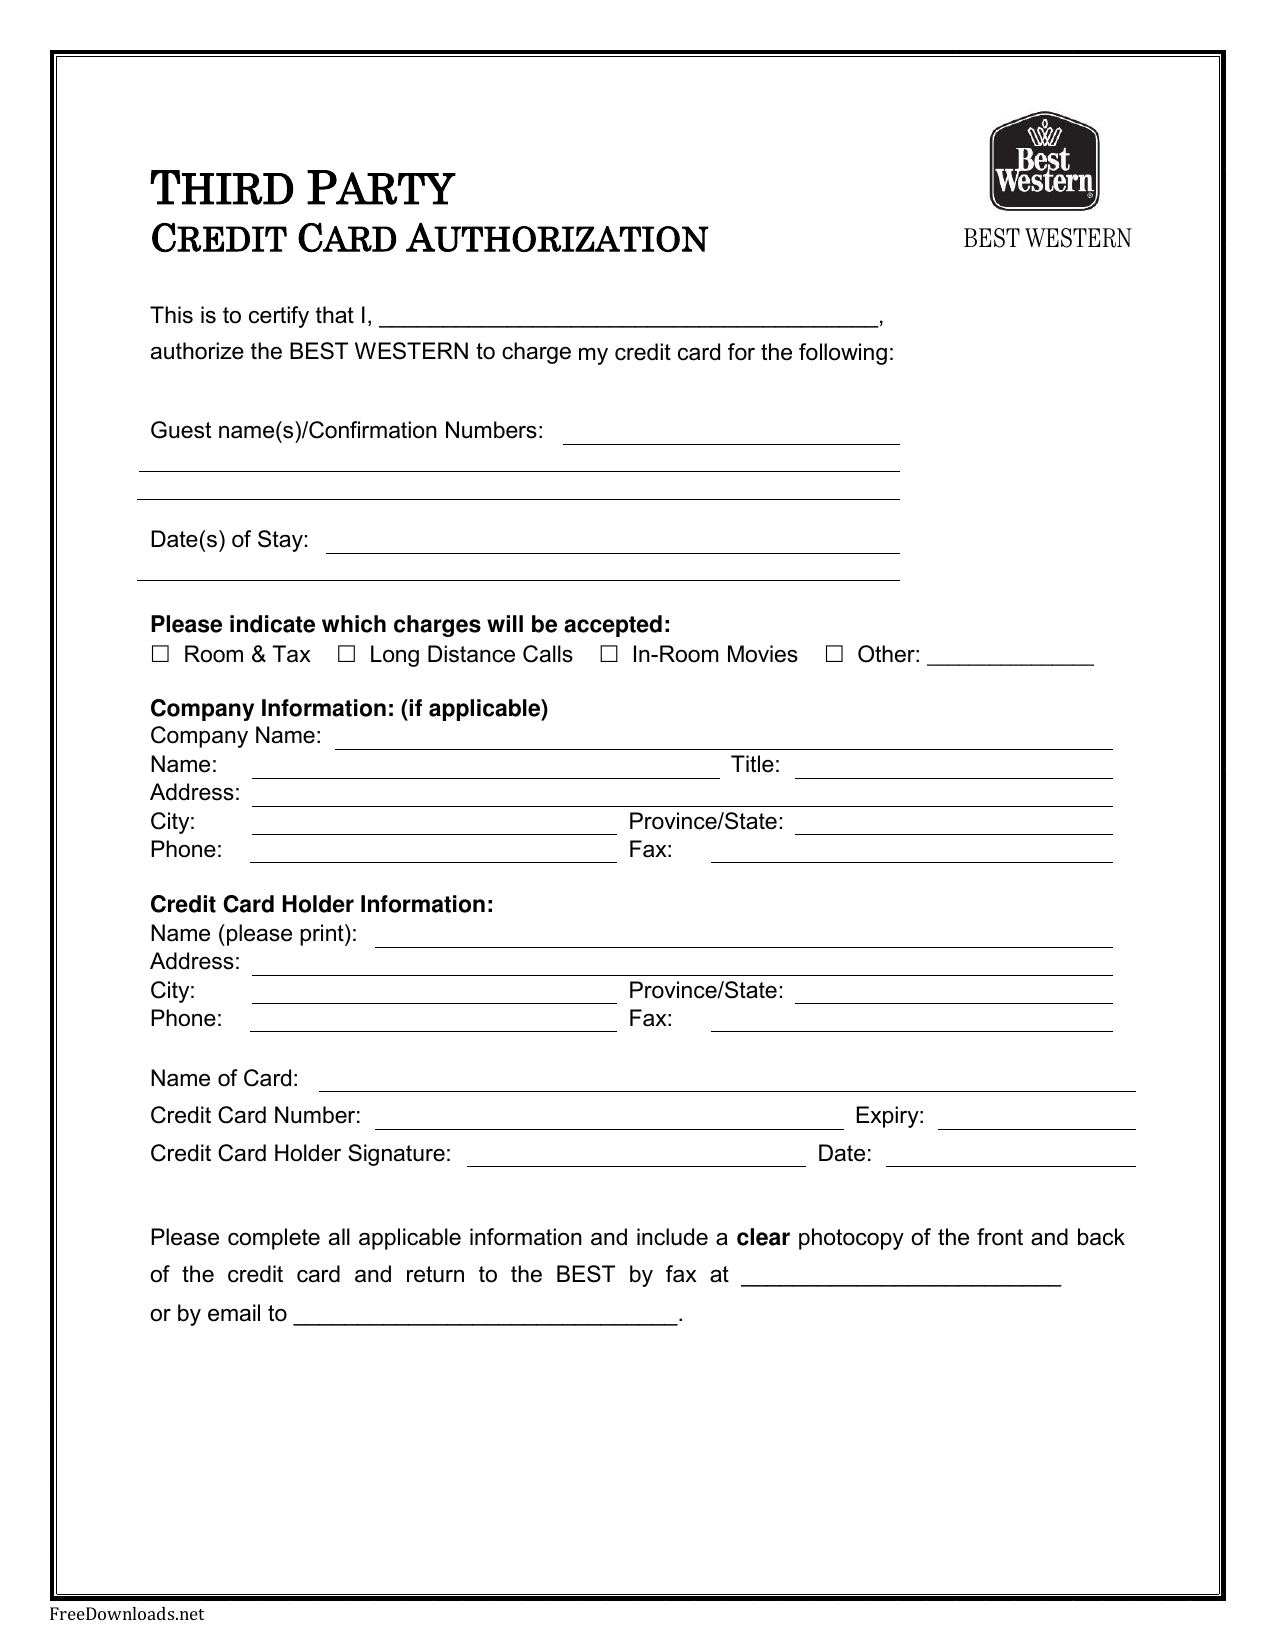 Cc Authorization Form - Calep.midnightpig.co For Hotel Credit Card Authorization Form Template